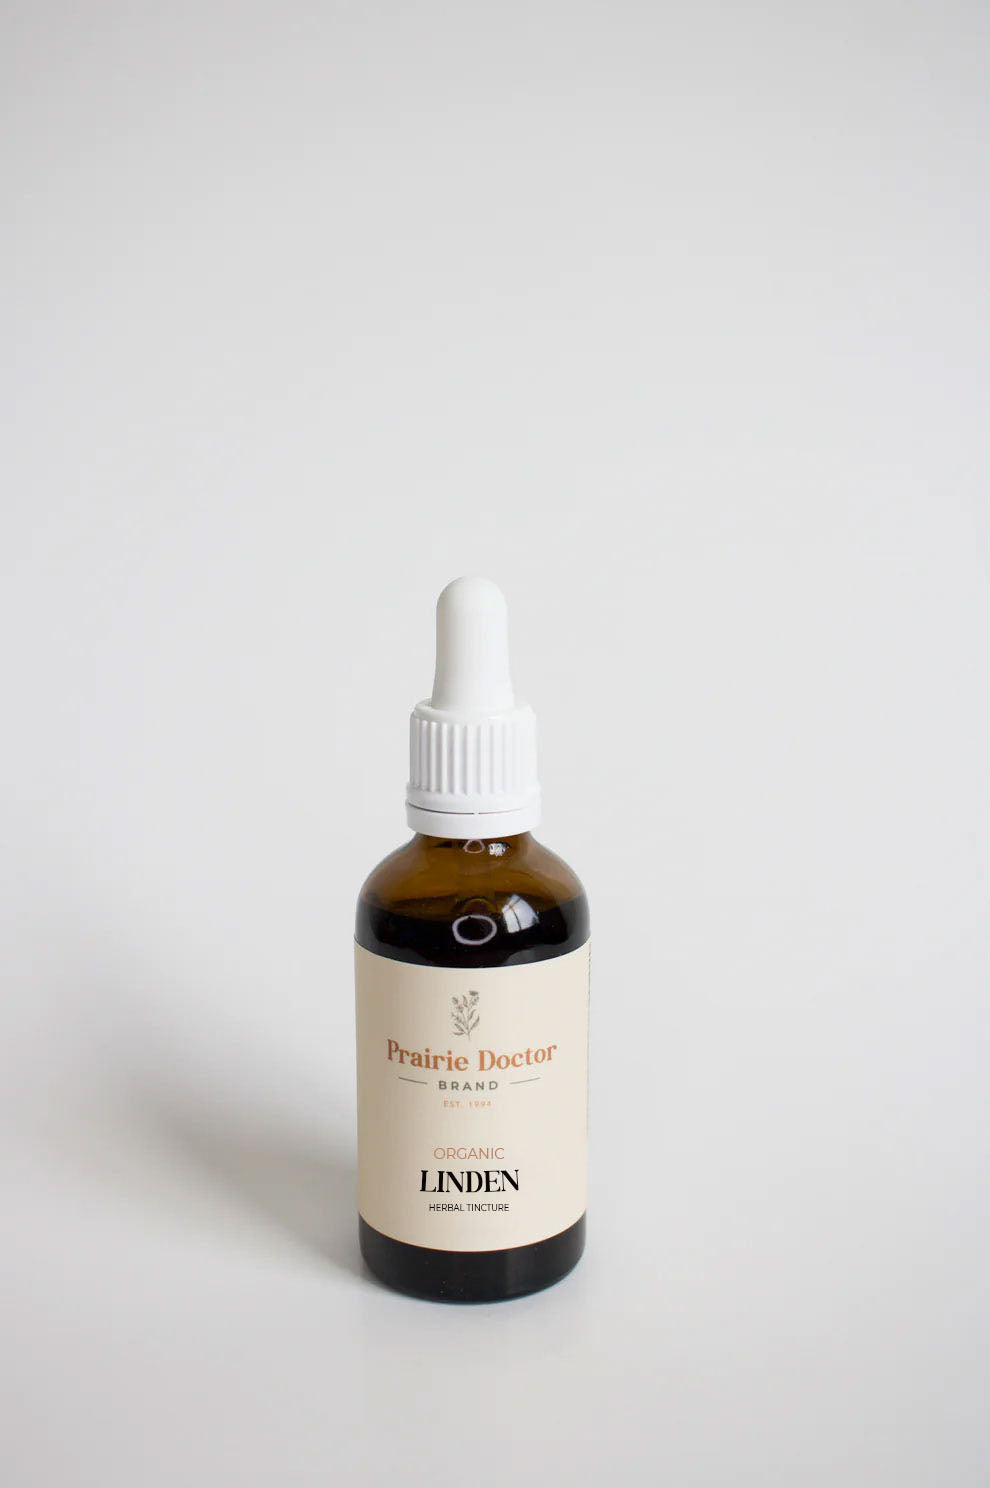 Our organic Linden herbal tincture has been crafted using organic, sustainably sourced Linden flowers. Linden is known as nervine, meaning that it has the ability to help relieve feelings of stress and nervousness.